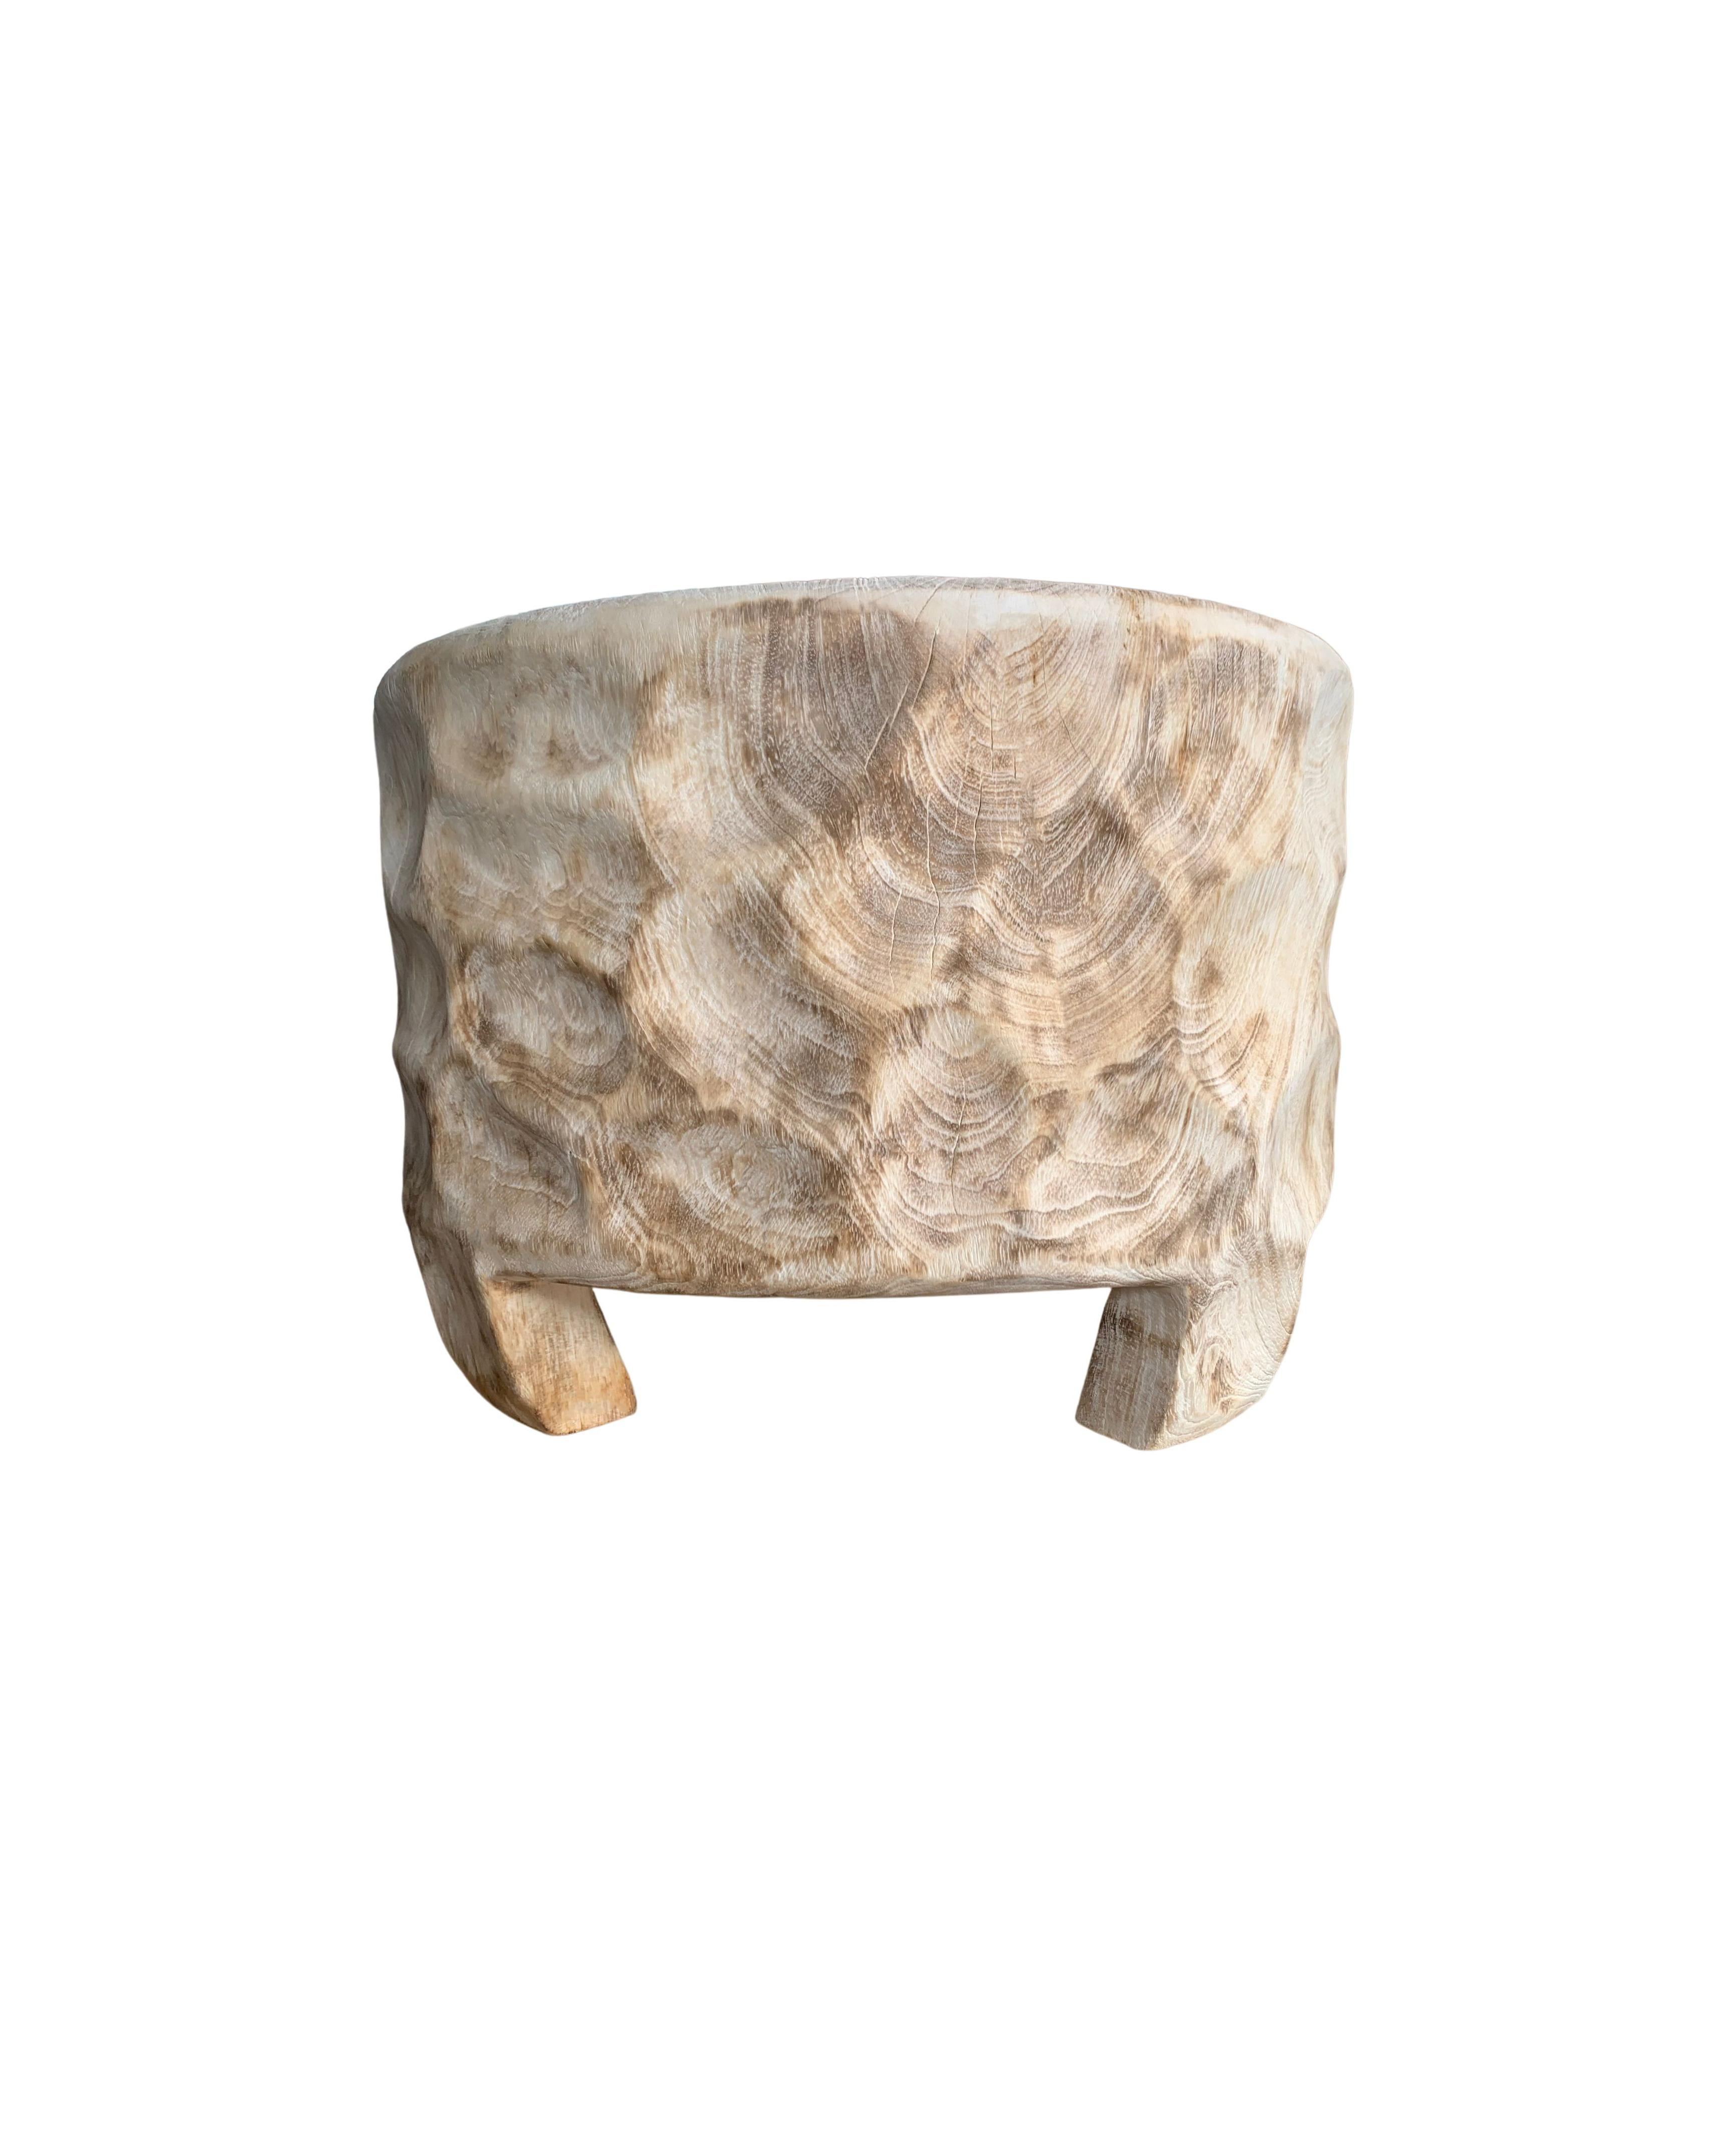 Indonesian Side Table Mango Wood Bleached Finish Hand-Hewn Detailing For Sale